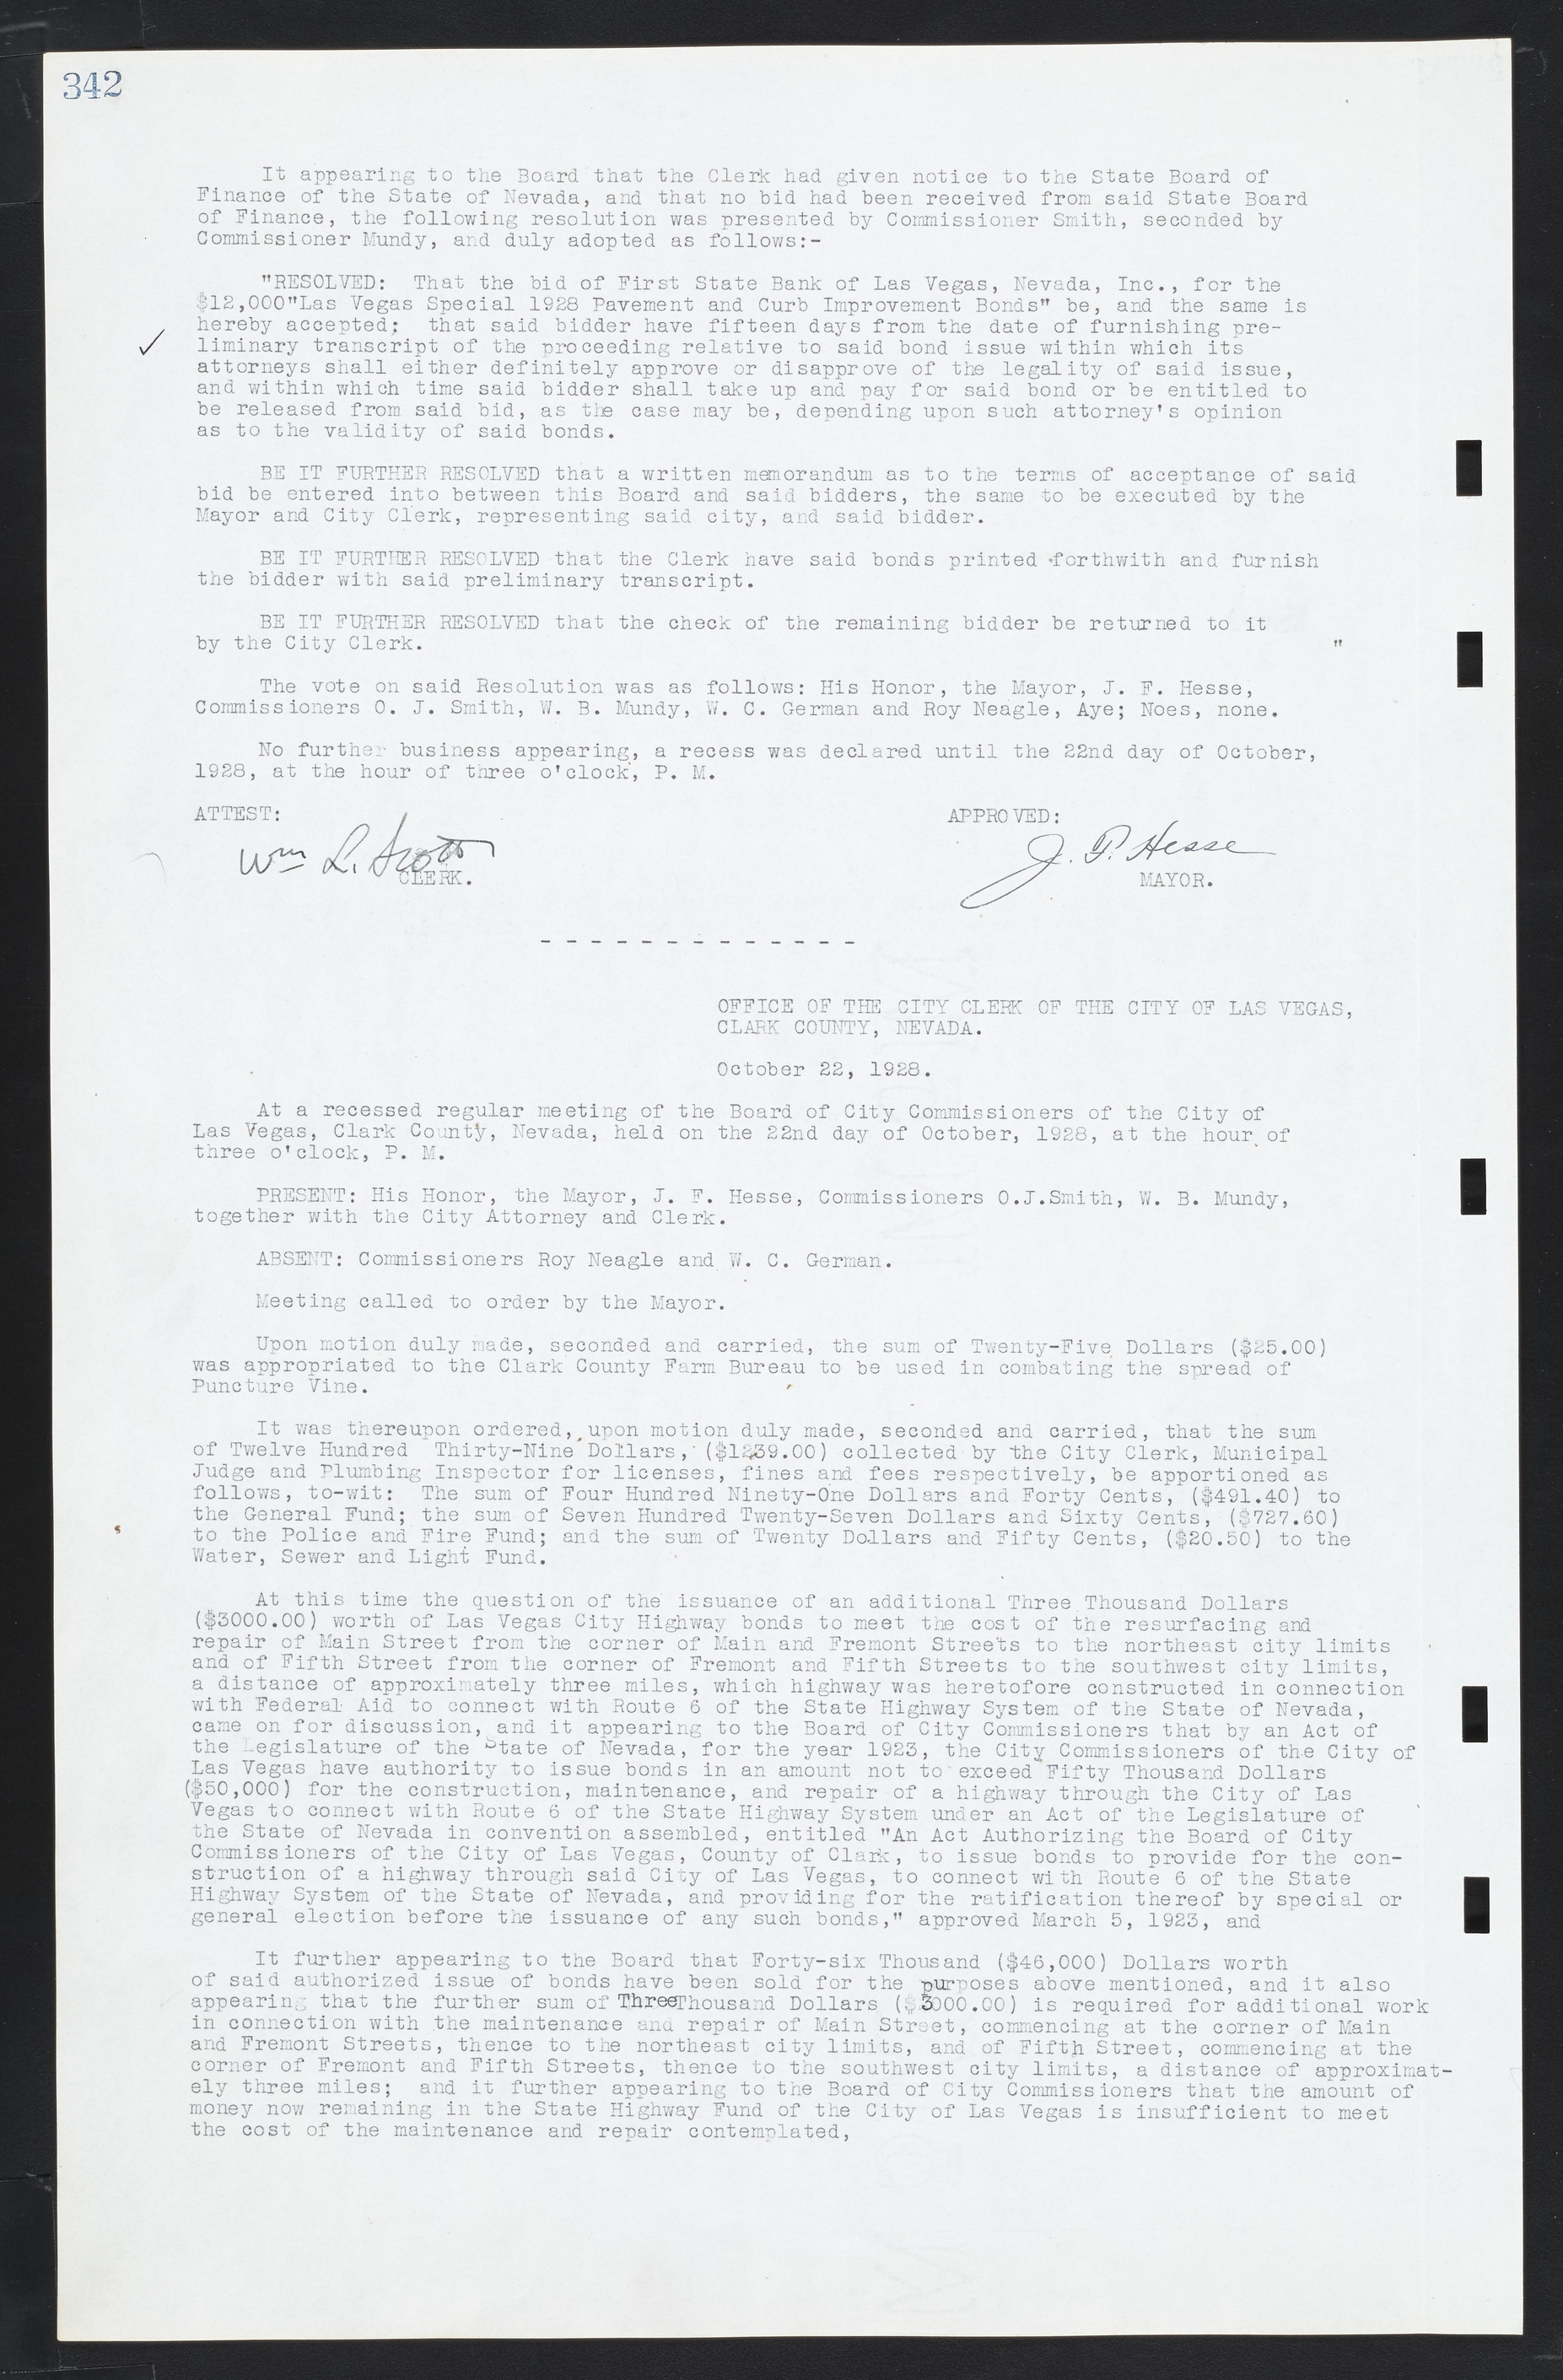 Las Vegas City Commission Minutes, March 1, 1922 to May 10, 1929, lvc000002-351